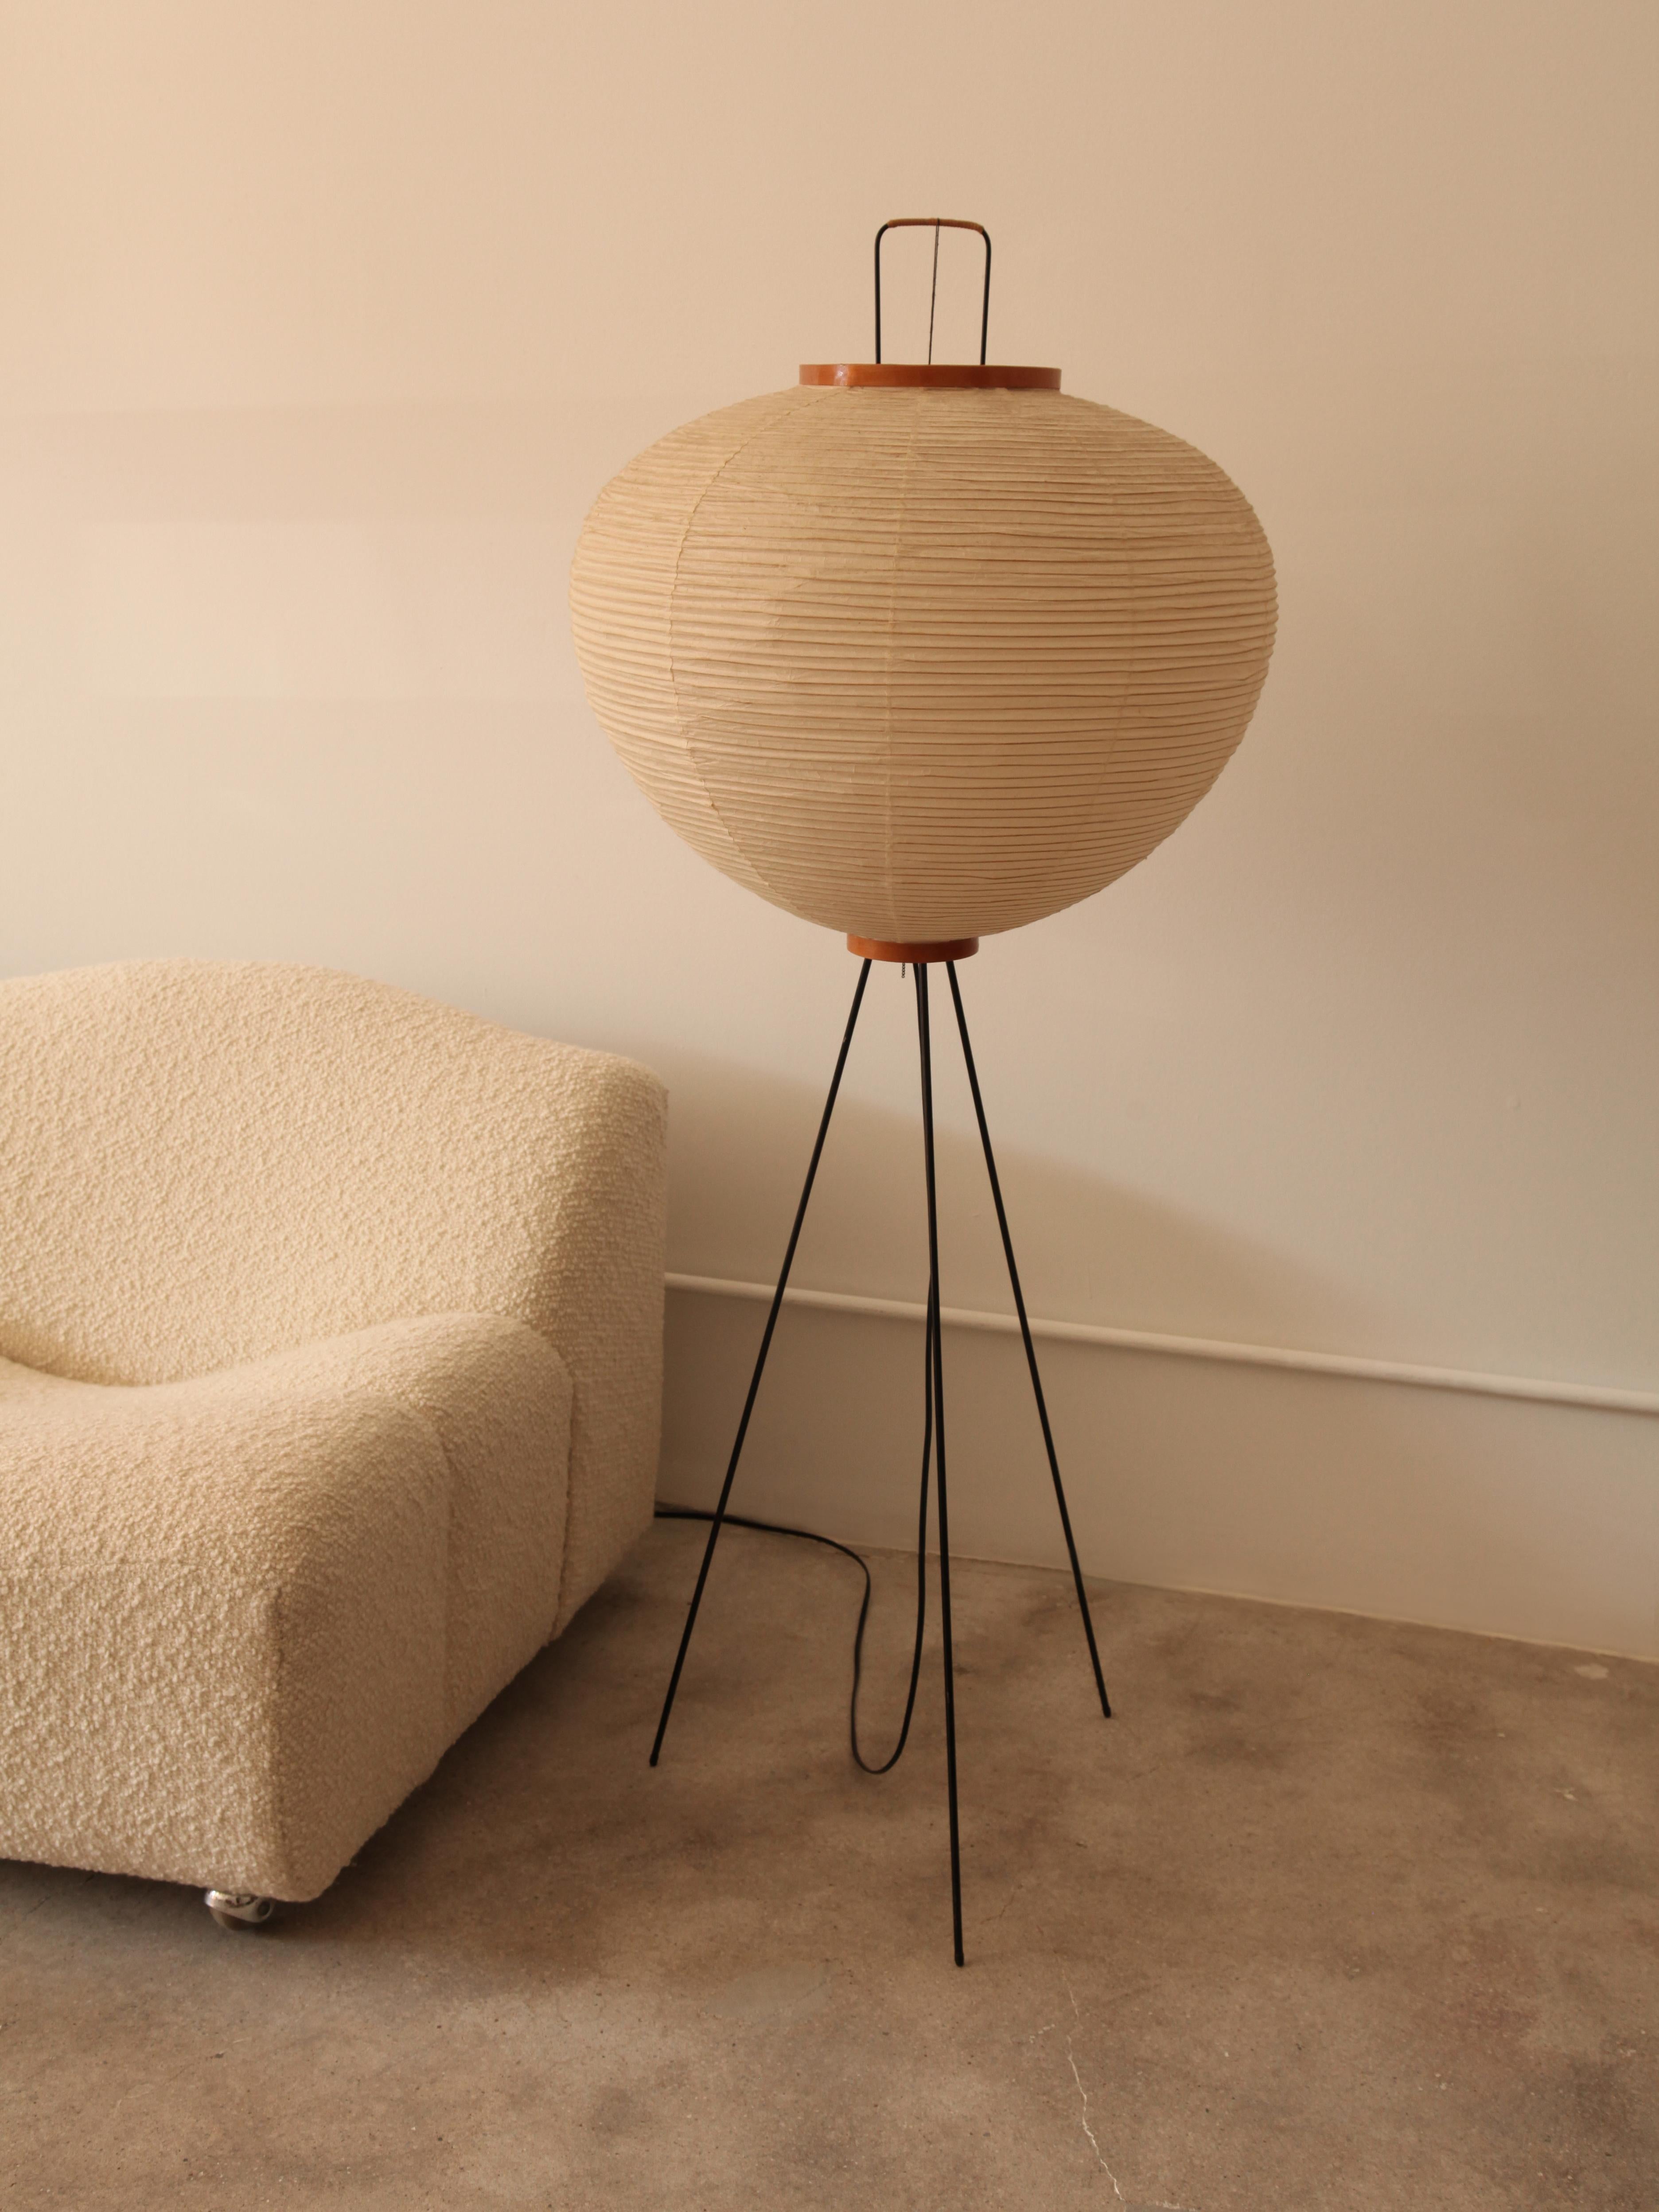 Great vintage example of Isamu Noguchi's floor lamp model 10A.

Akari Light sculptures by Isamu Noguchi are considered icons of 1950s modern design. Designed by Noguchi beginning in 1951 and handmade for a half century by the original manufacturer